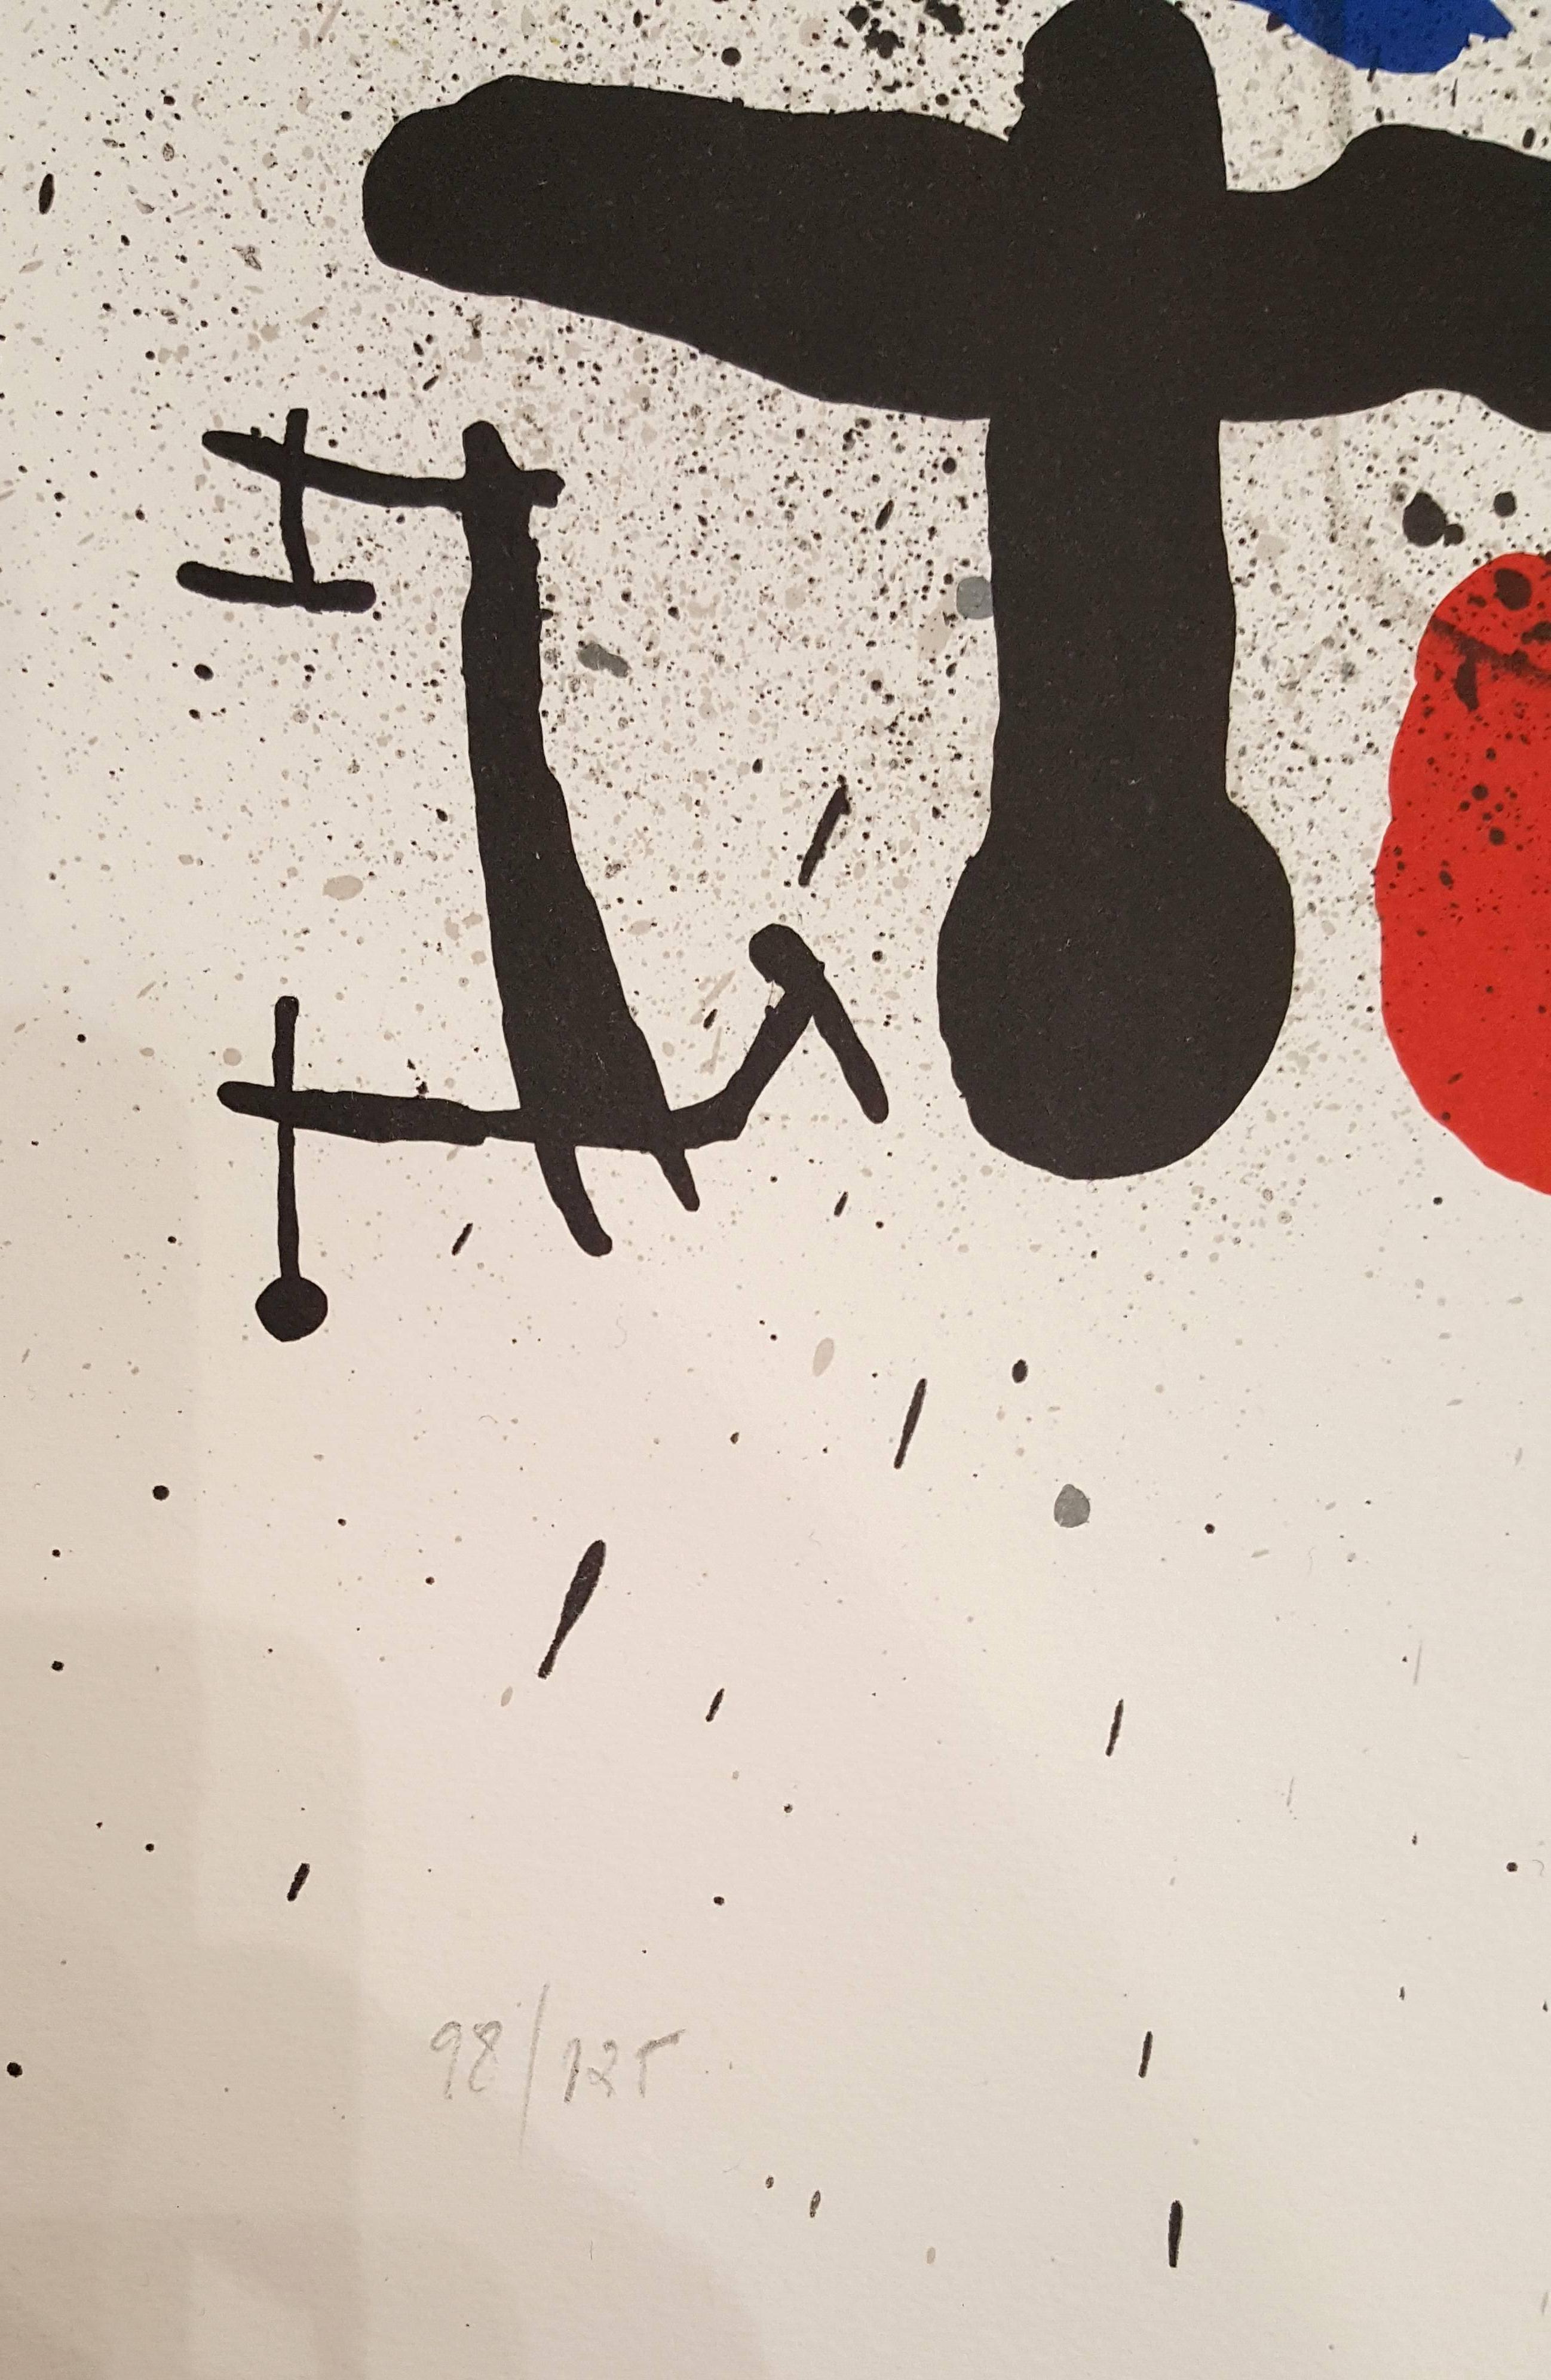 Liberty of Liberties - Original Lithograph Handsigned and Numbered - Abstract Print by Joan Miró